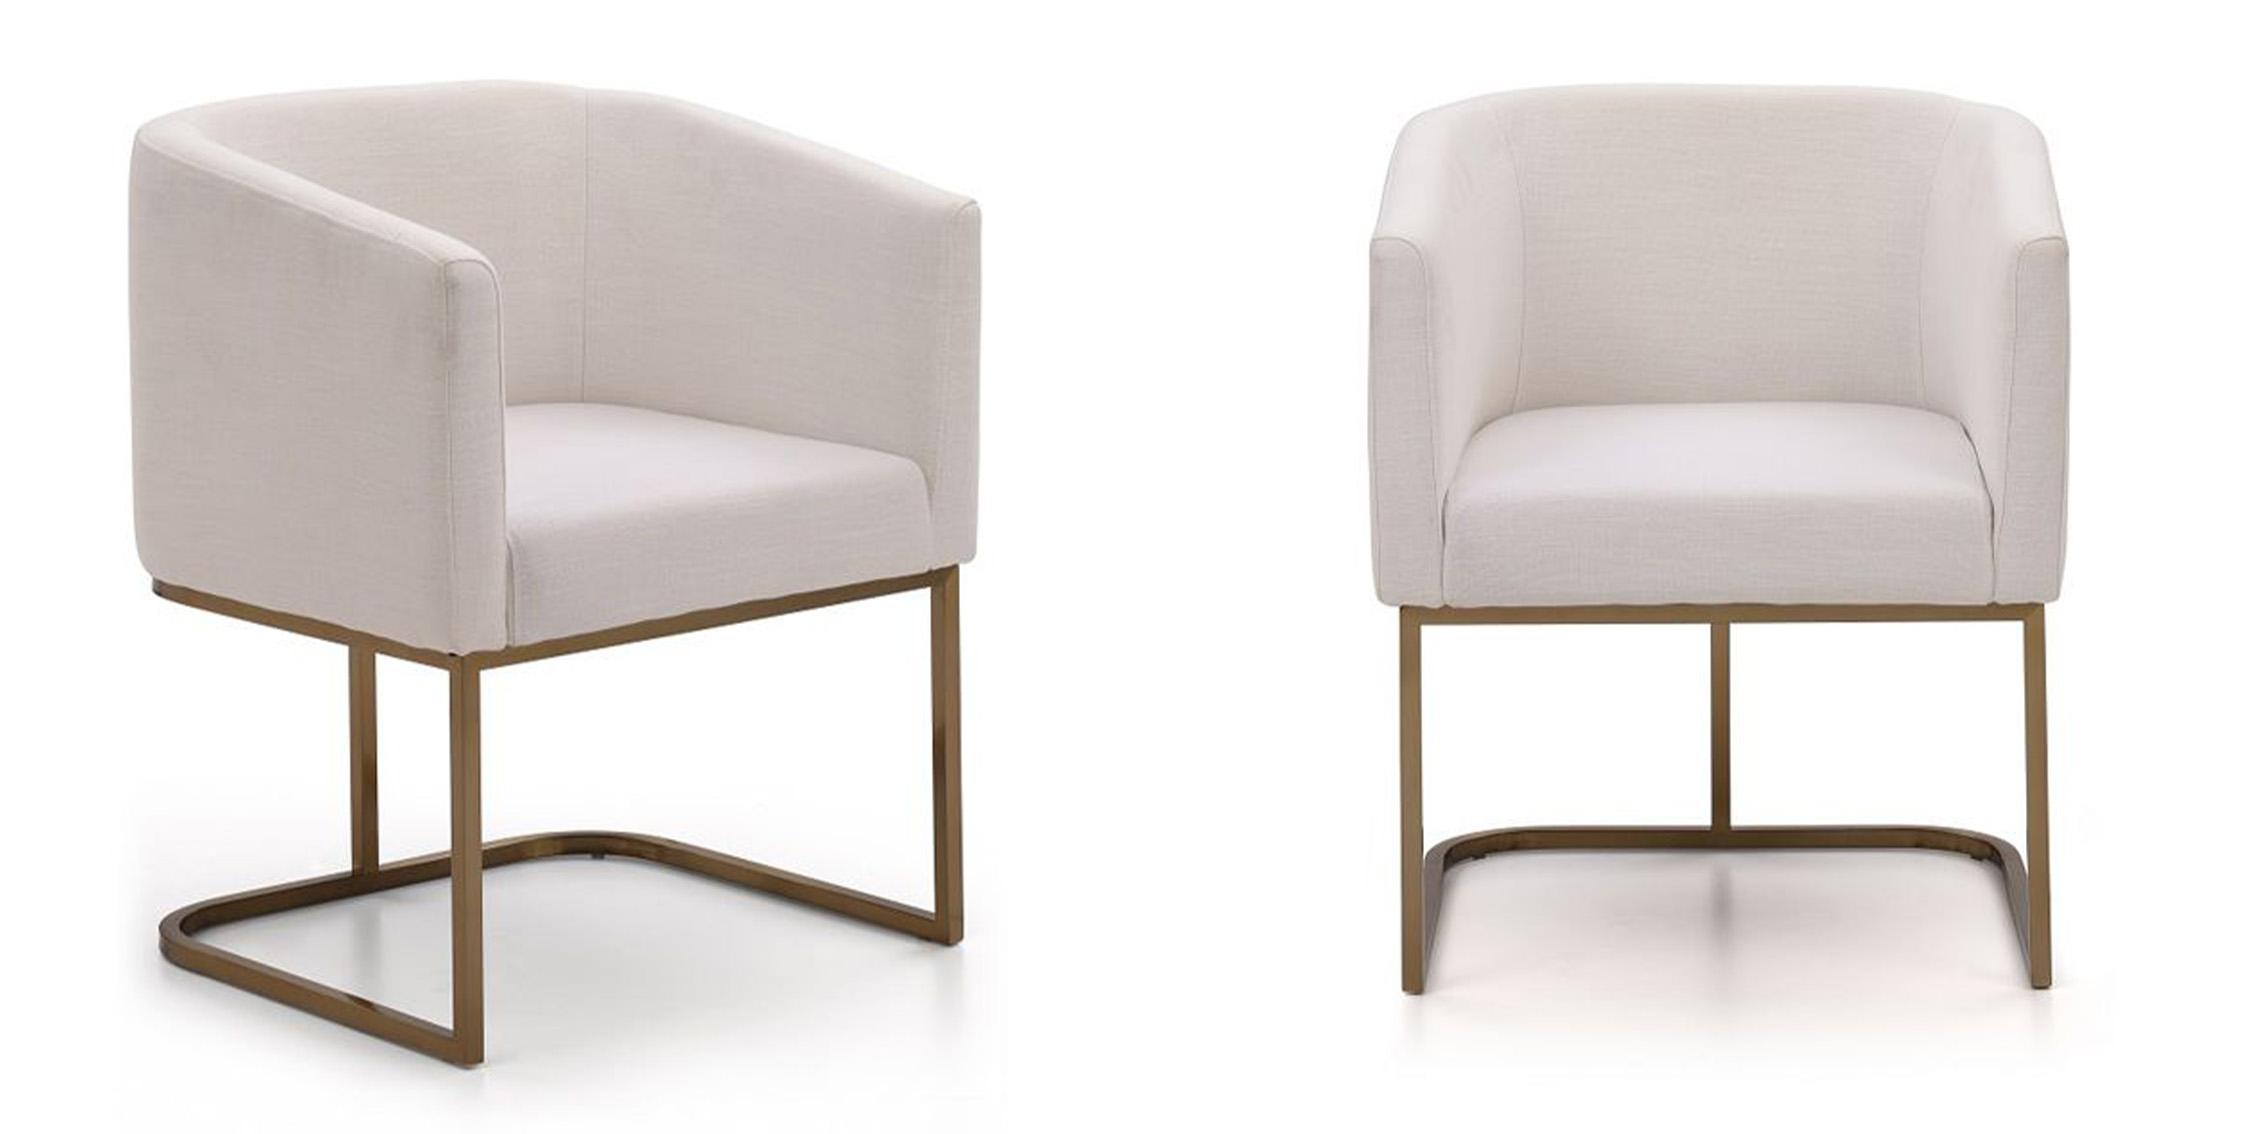 Contemporary, Modern Dining Chair Set VGVCB8362-WHTBRS-Set-2 VGVCB8362-WHTBRS-Set-2 in Cream Fabric